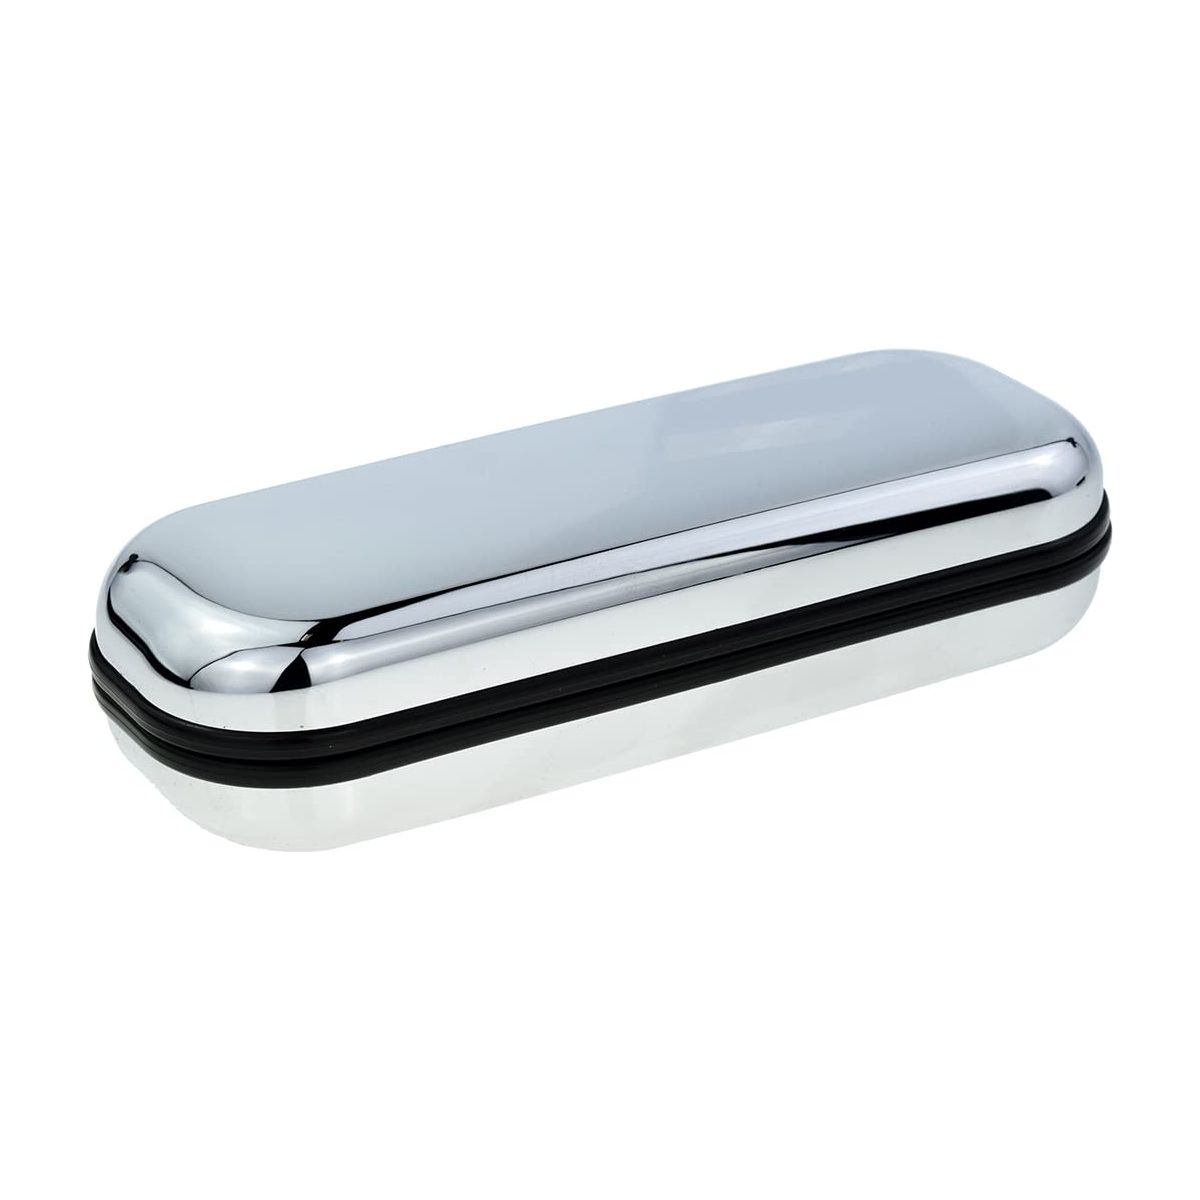 Polished Silver Finish Spectacles Glasses Case - Ashton and Finch